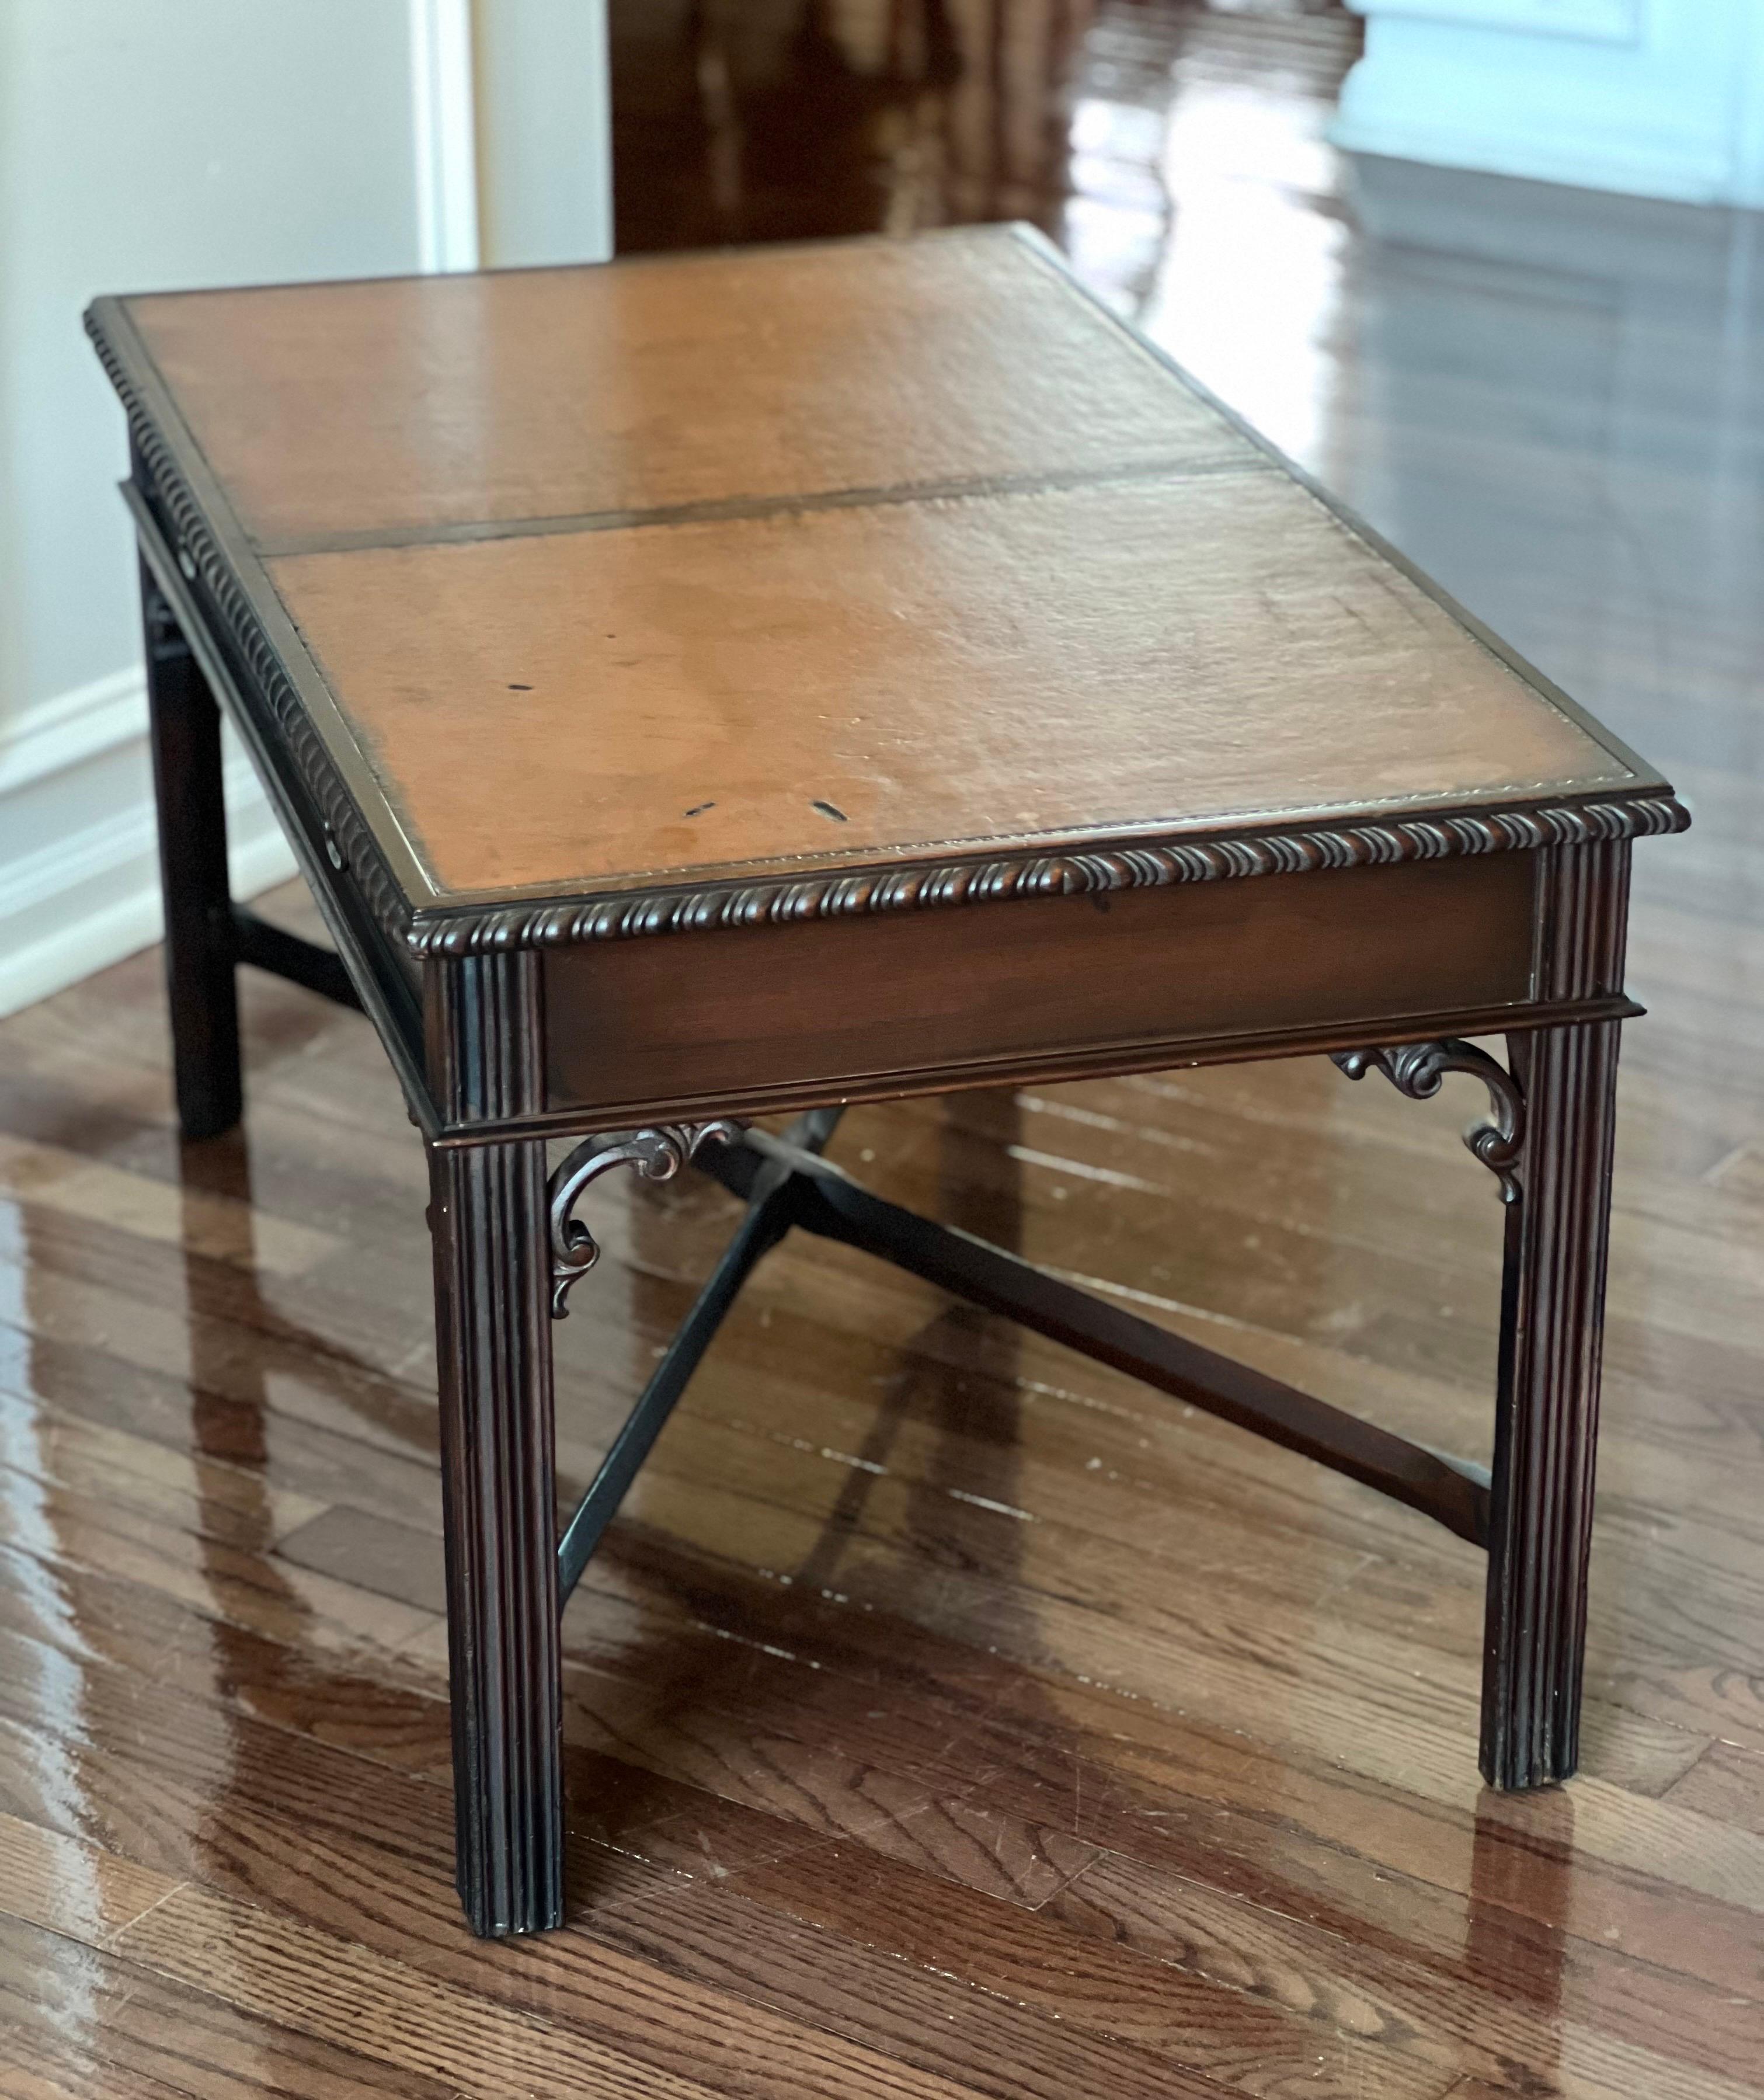 North American Mahogany Chippendale Style Coffee Table with Leather Top and Drawers by Imperial For Sale